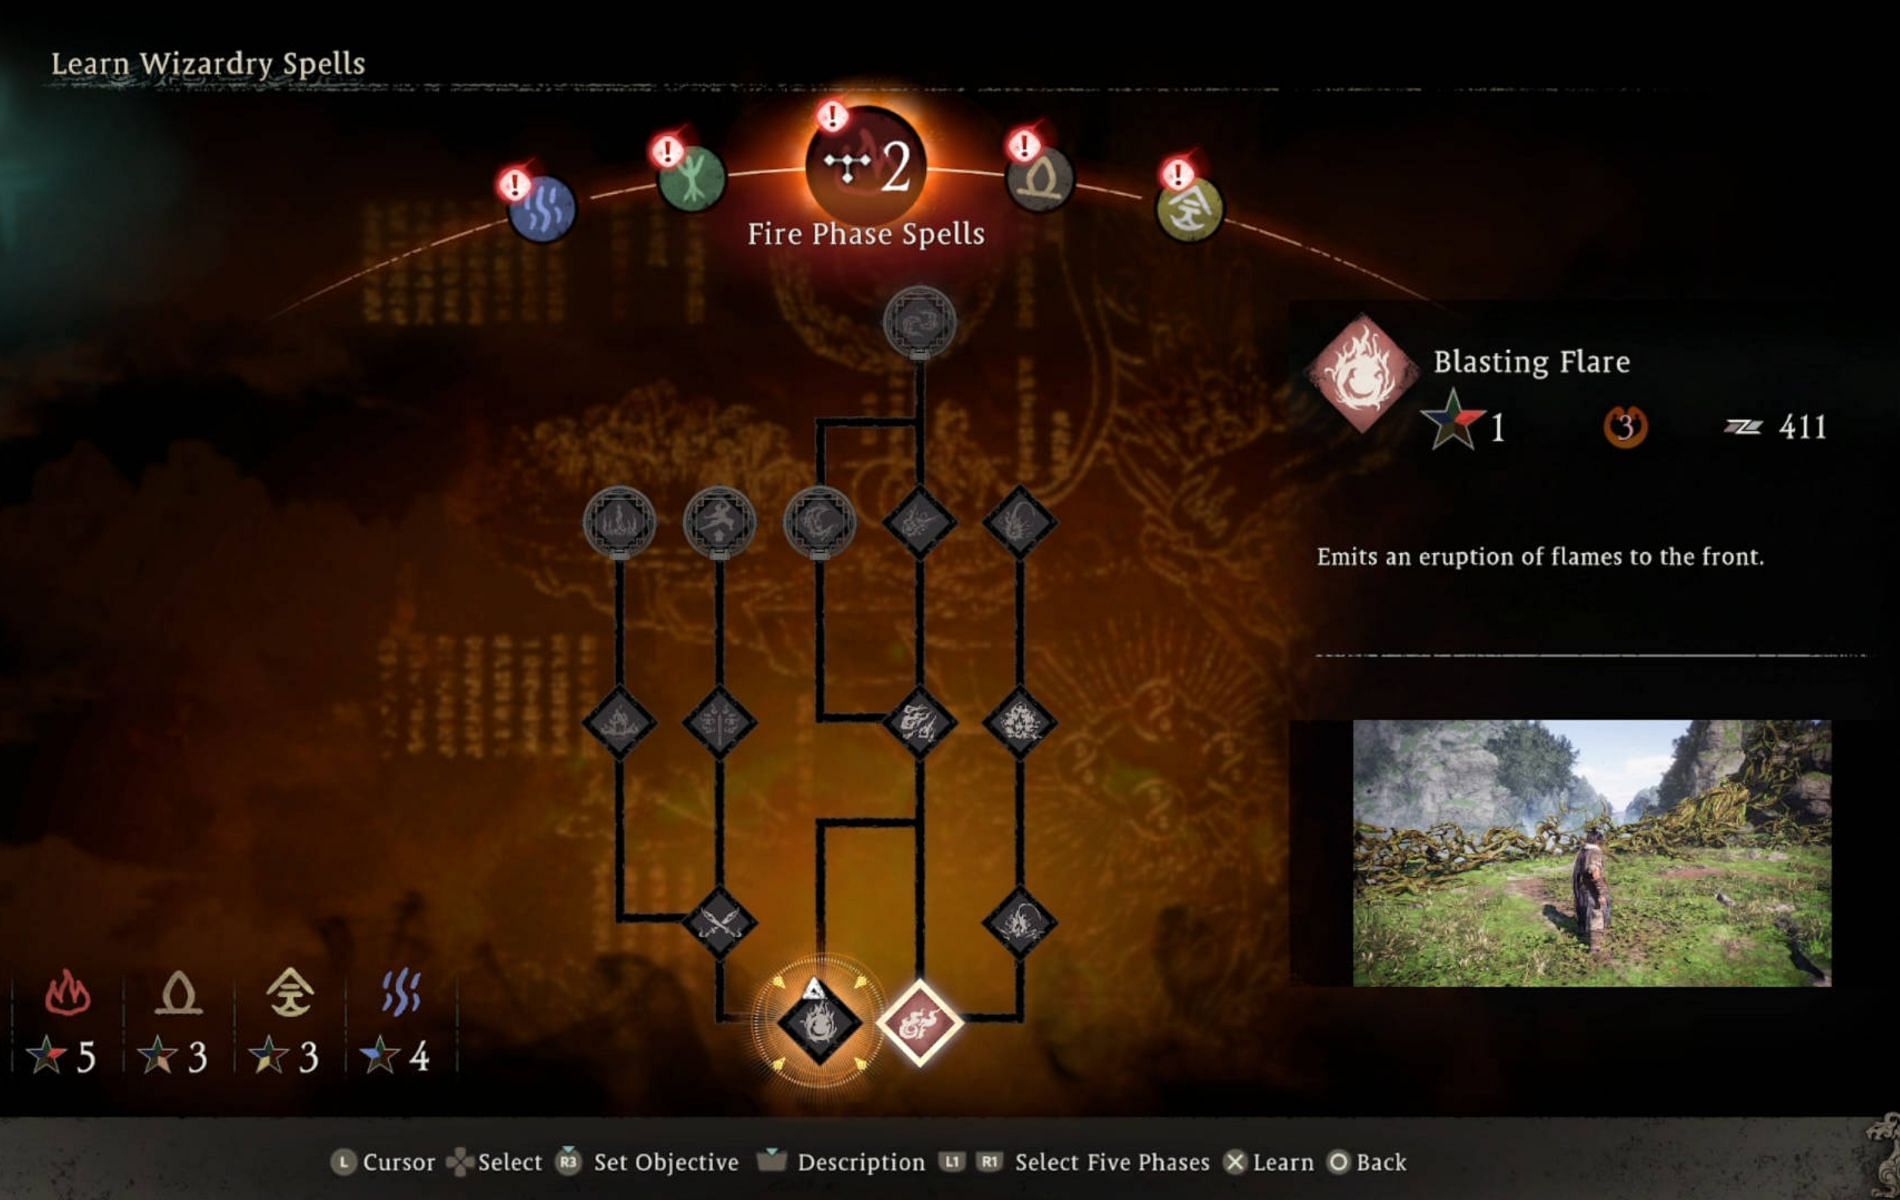 There are 14 spells to learn in the Fire spell phase (Image via Koei Tecmo)